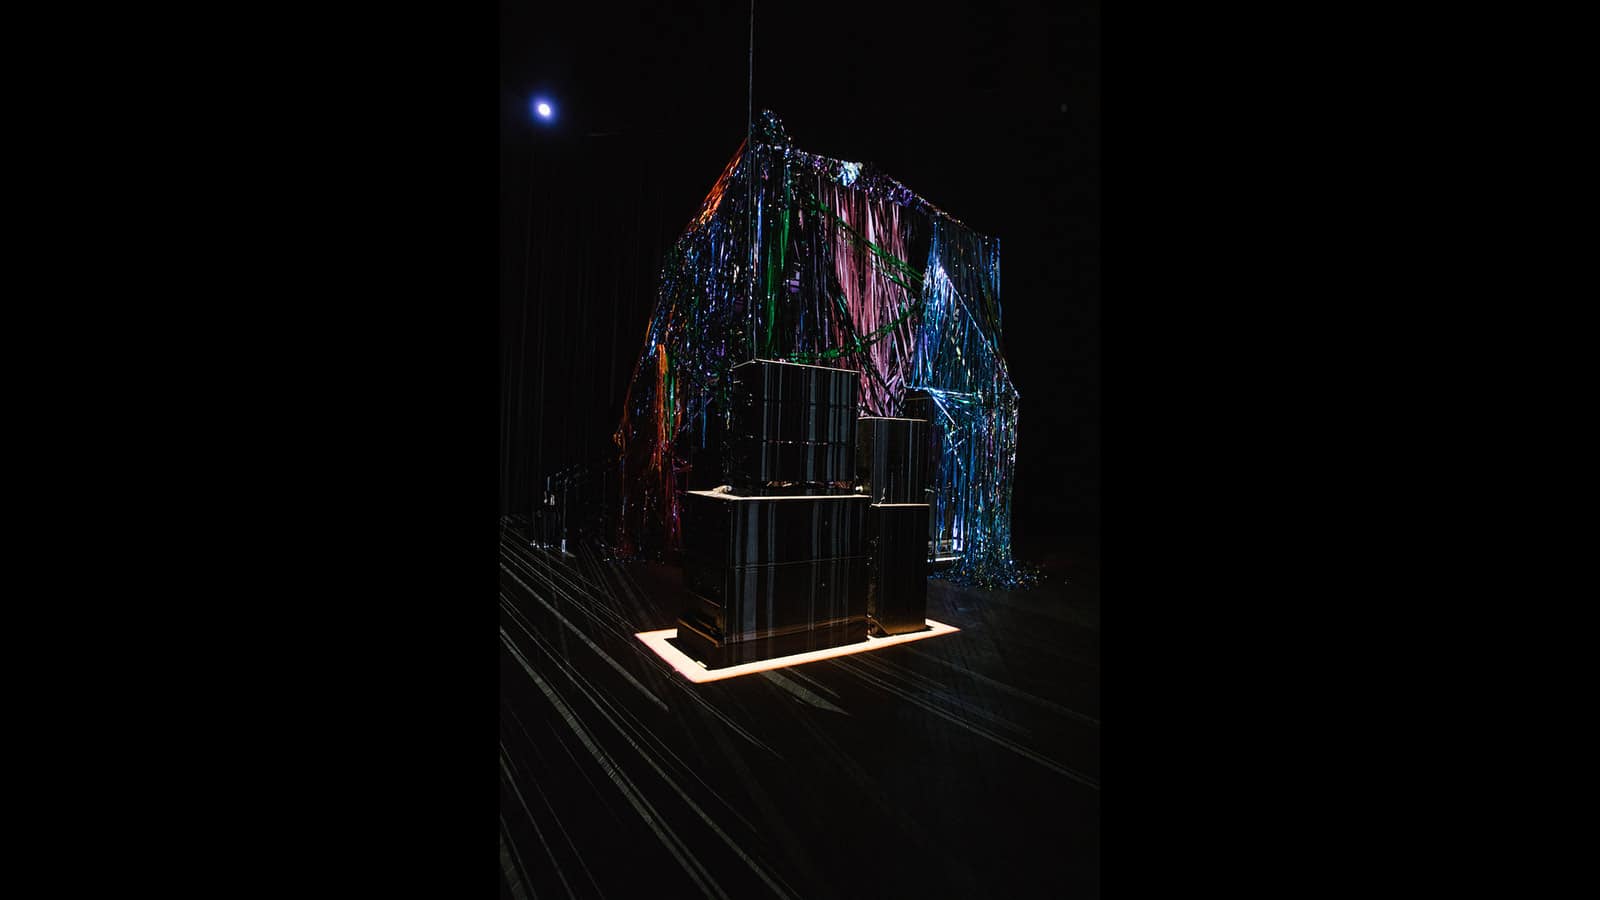 Audiences Loosen Up and Let Go with Meyer Sound in Nick Cave’s Immersive Performance Installation at Park Avenue Armory